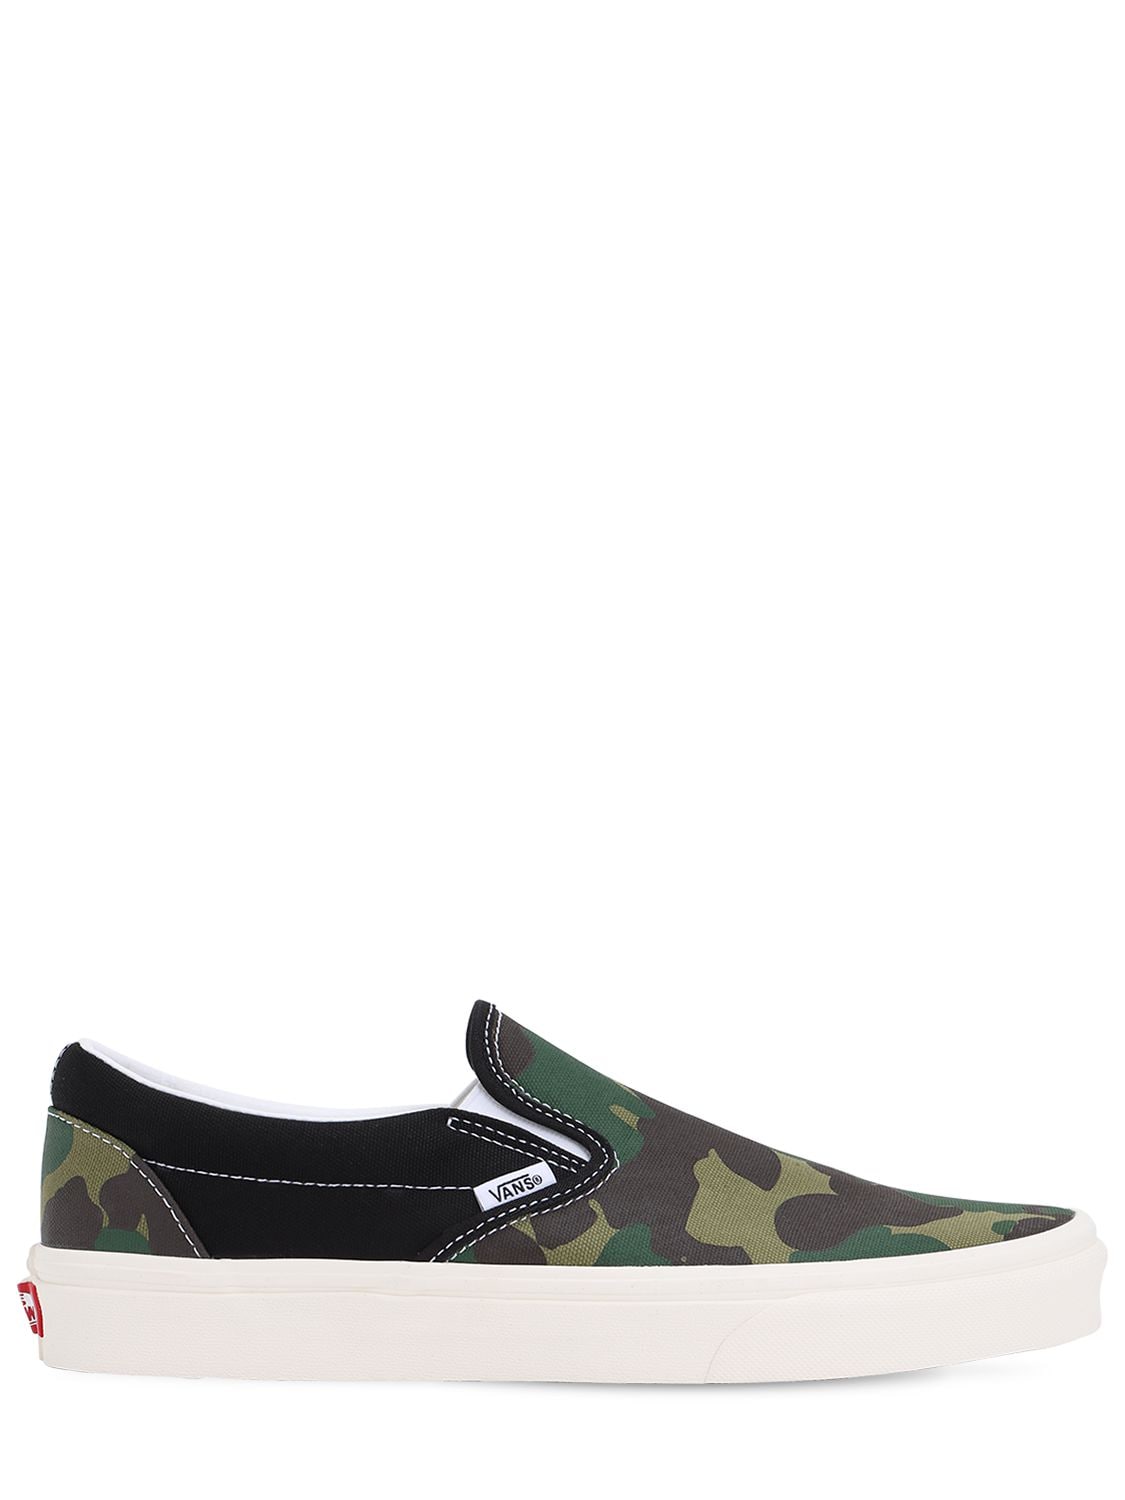 Image of Classic Slip-on Mismatch Sneakers